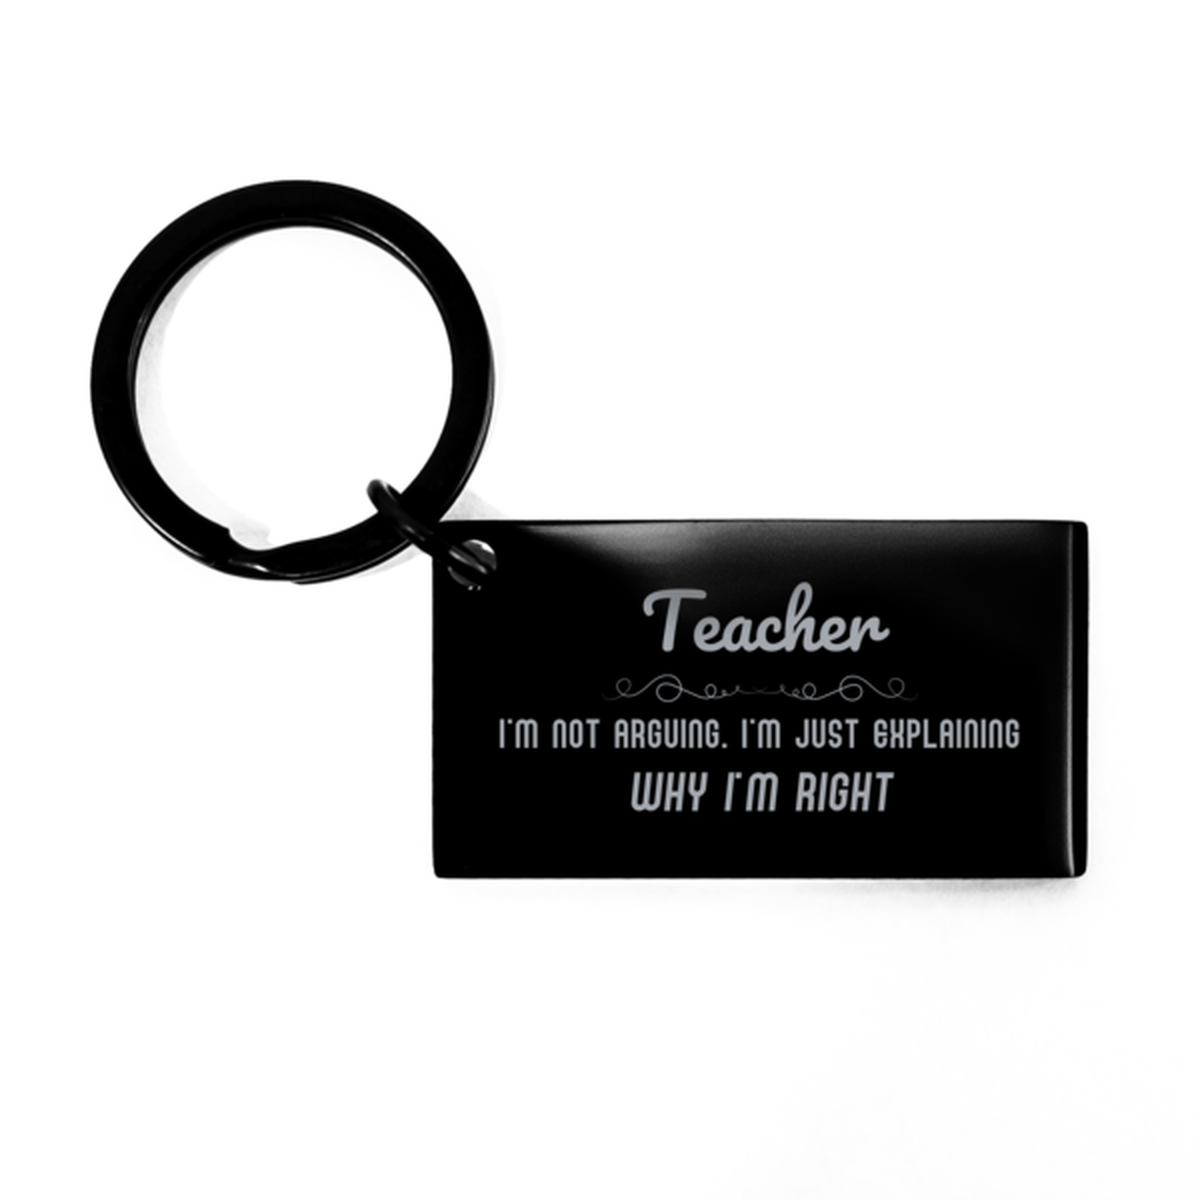 Teacher I'm not Arguing. I'm Just Explaining Why I'm RIGHT Keychain, Funny Saying Quote Teacher Gifts For Teacher Graduation Birthday Christmas Gifts for Men Women Coworker